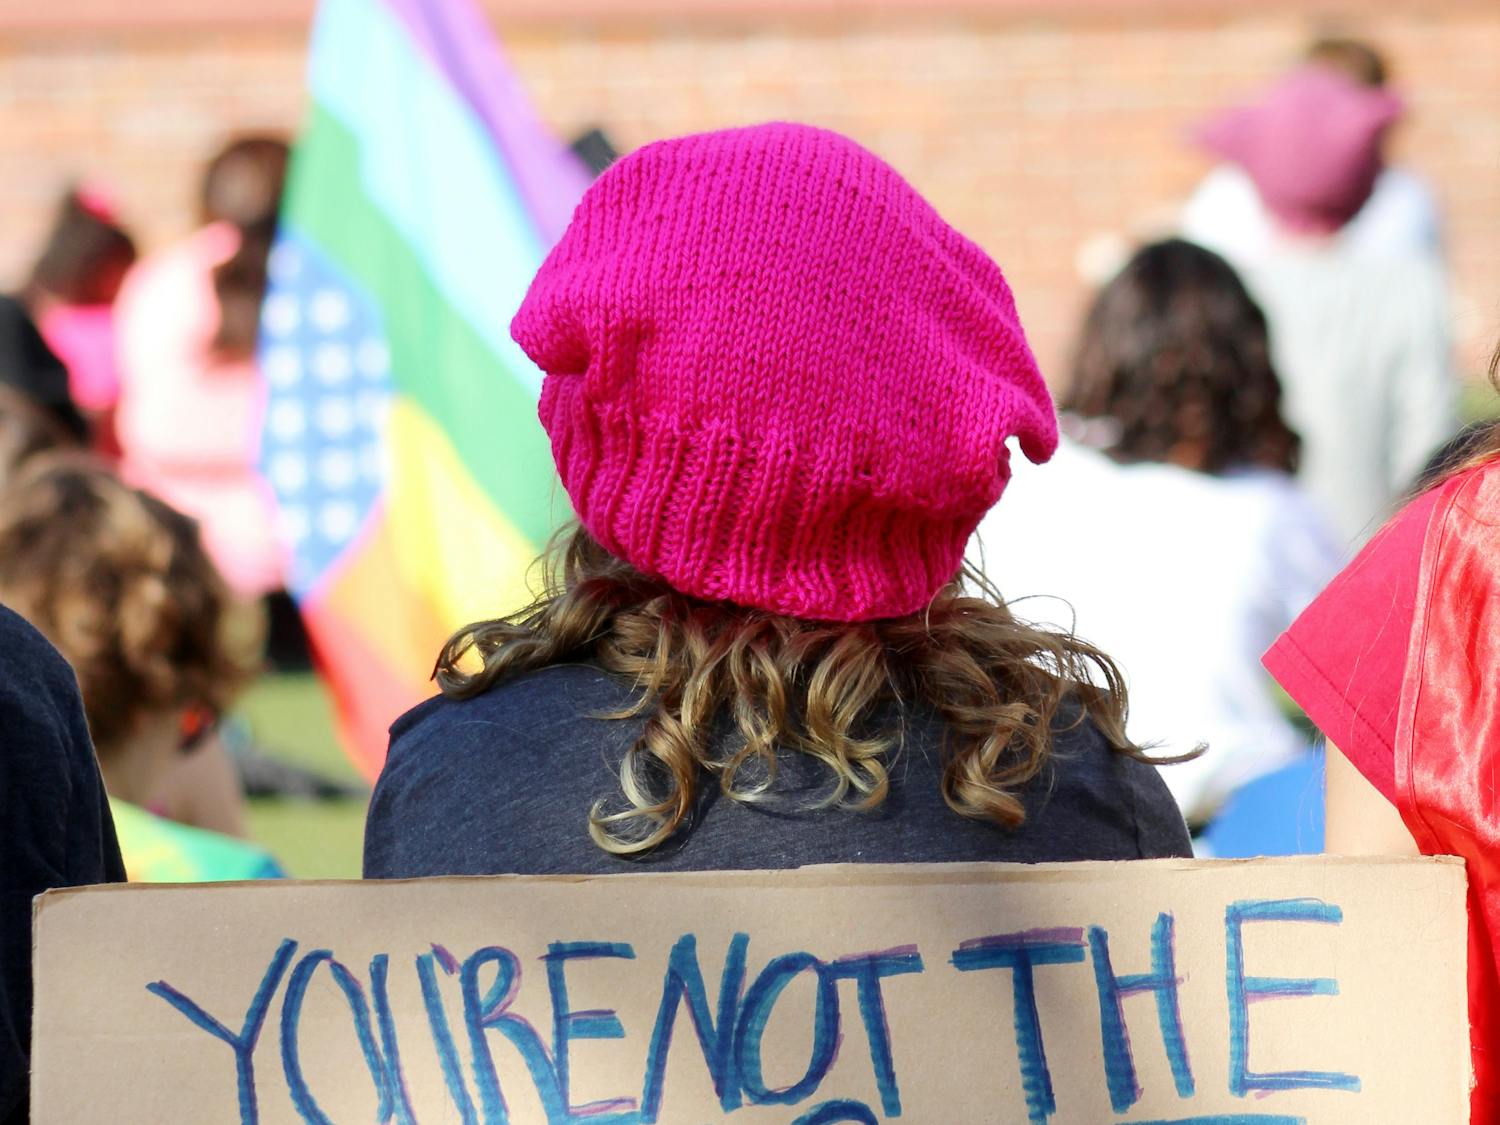 A protester wearing the signature pink knit hat to the Women's Resistance movement sits among a crowd of protesters gathered on Bo Diddley Community Plaza to listen to speakers before marching down University Avenue to raise support for female involvement in the American political process. Donations were collected for areas affected by the 2017 hurricane season.